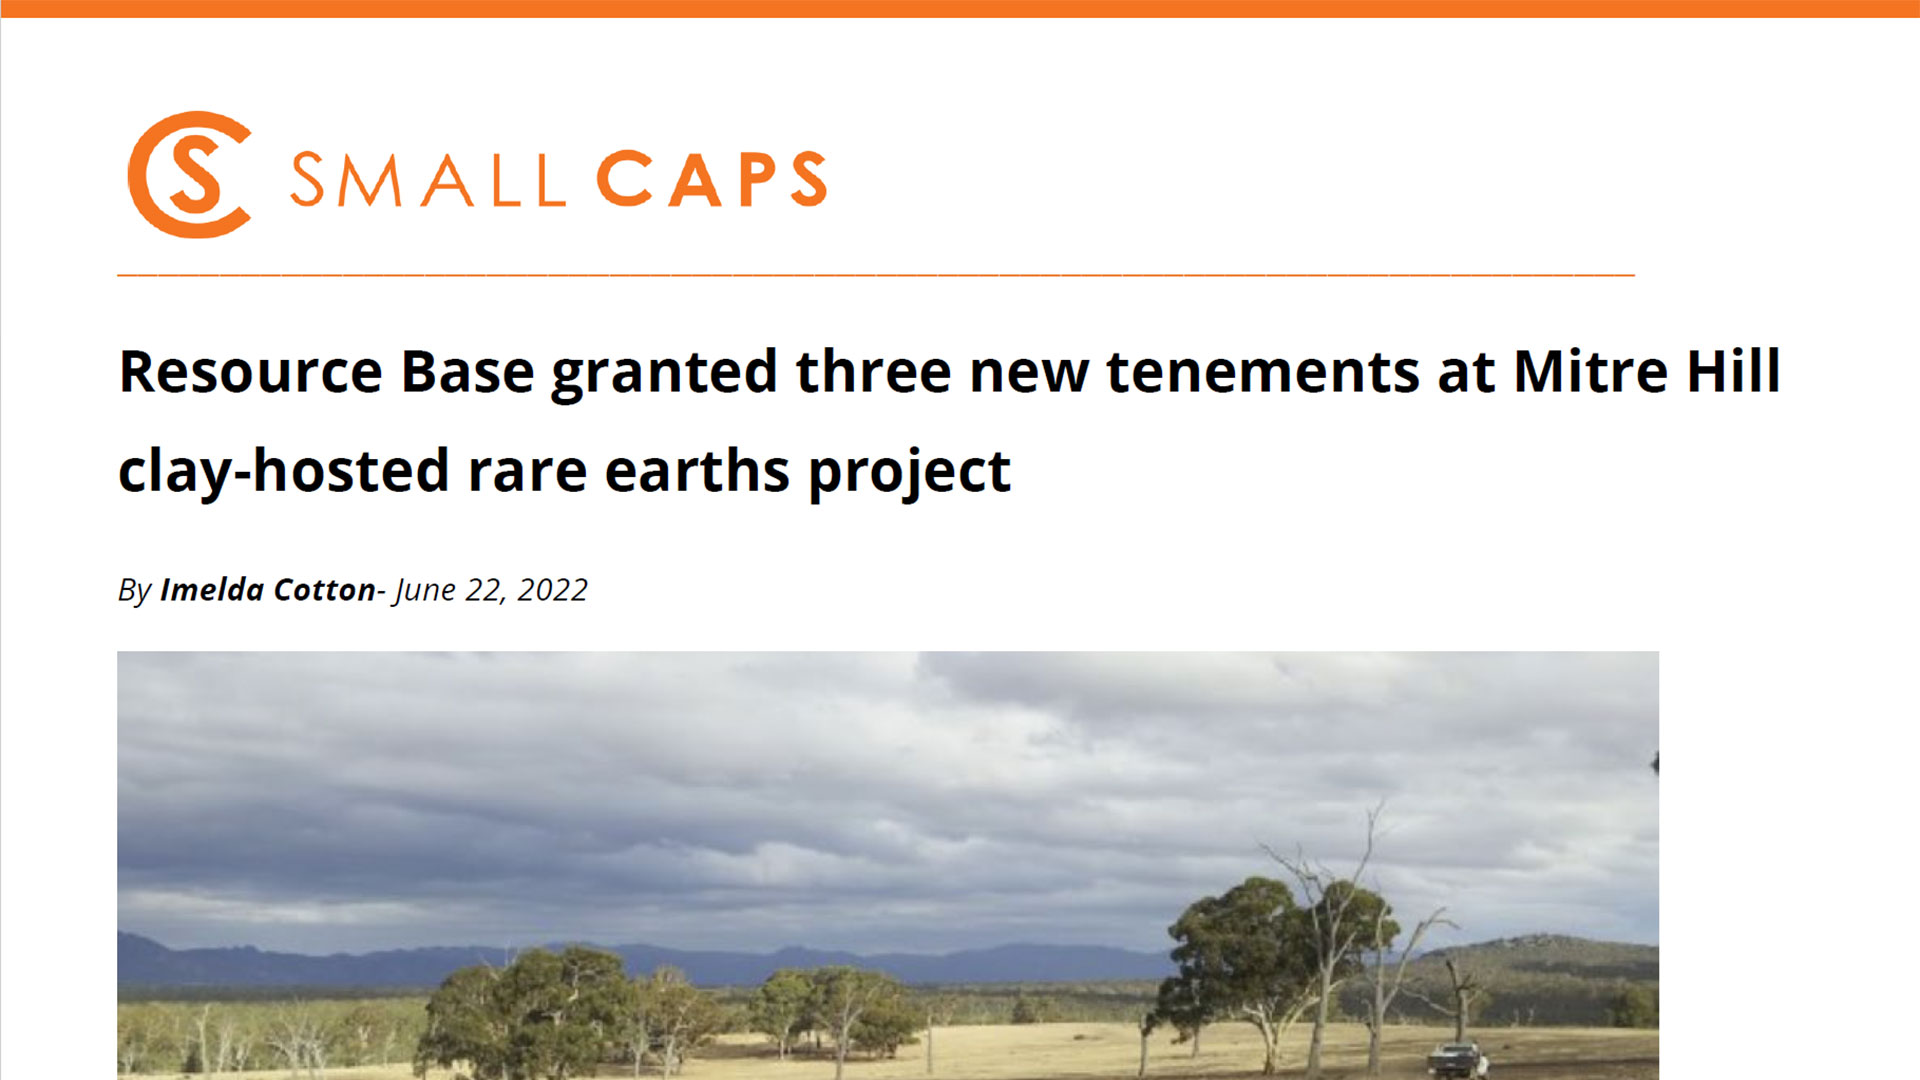 Small Caps: Resource Base Granted Three New Tenements at Mitre Hill Clay-hosted Rare Earths Project